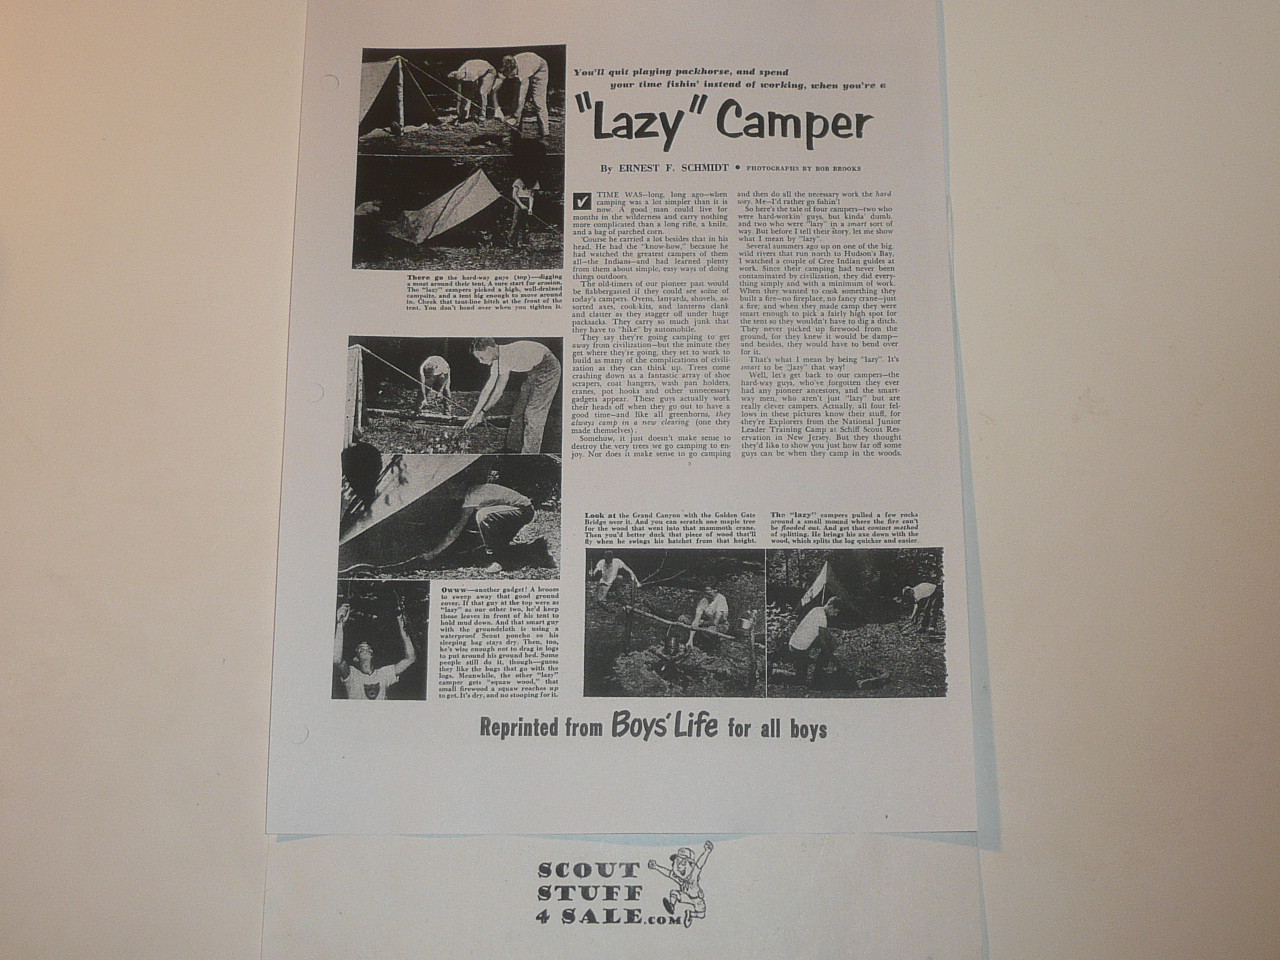 Lazy Camper, By Ernest Schmidt, Boys' Life Single Topic Reprint from the 1950's - 1960's , written for Scouts, great teaching materials